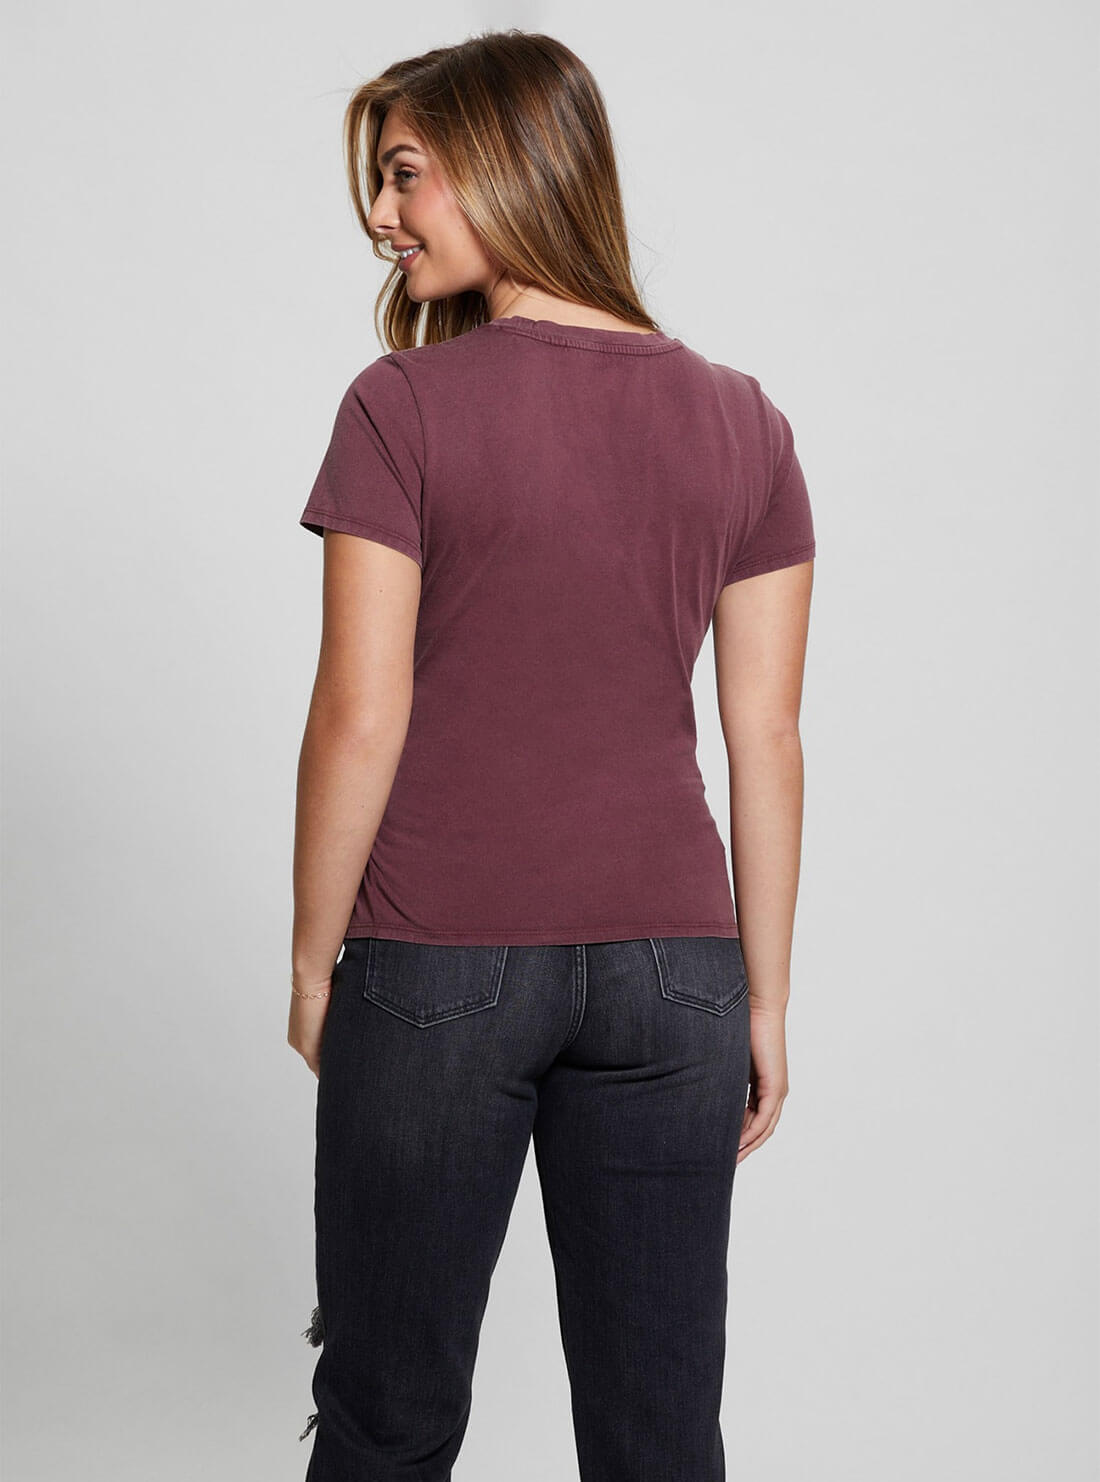 Dark Purple Heart Aflame Graphic Lace-up T-Shirt | GUESS Women's | back view